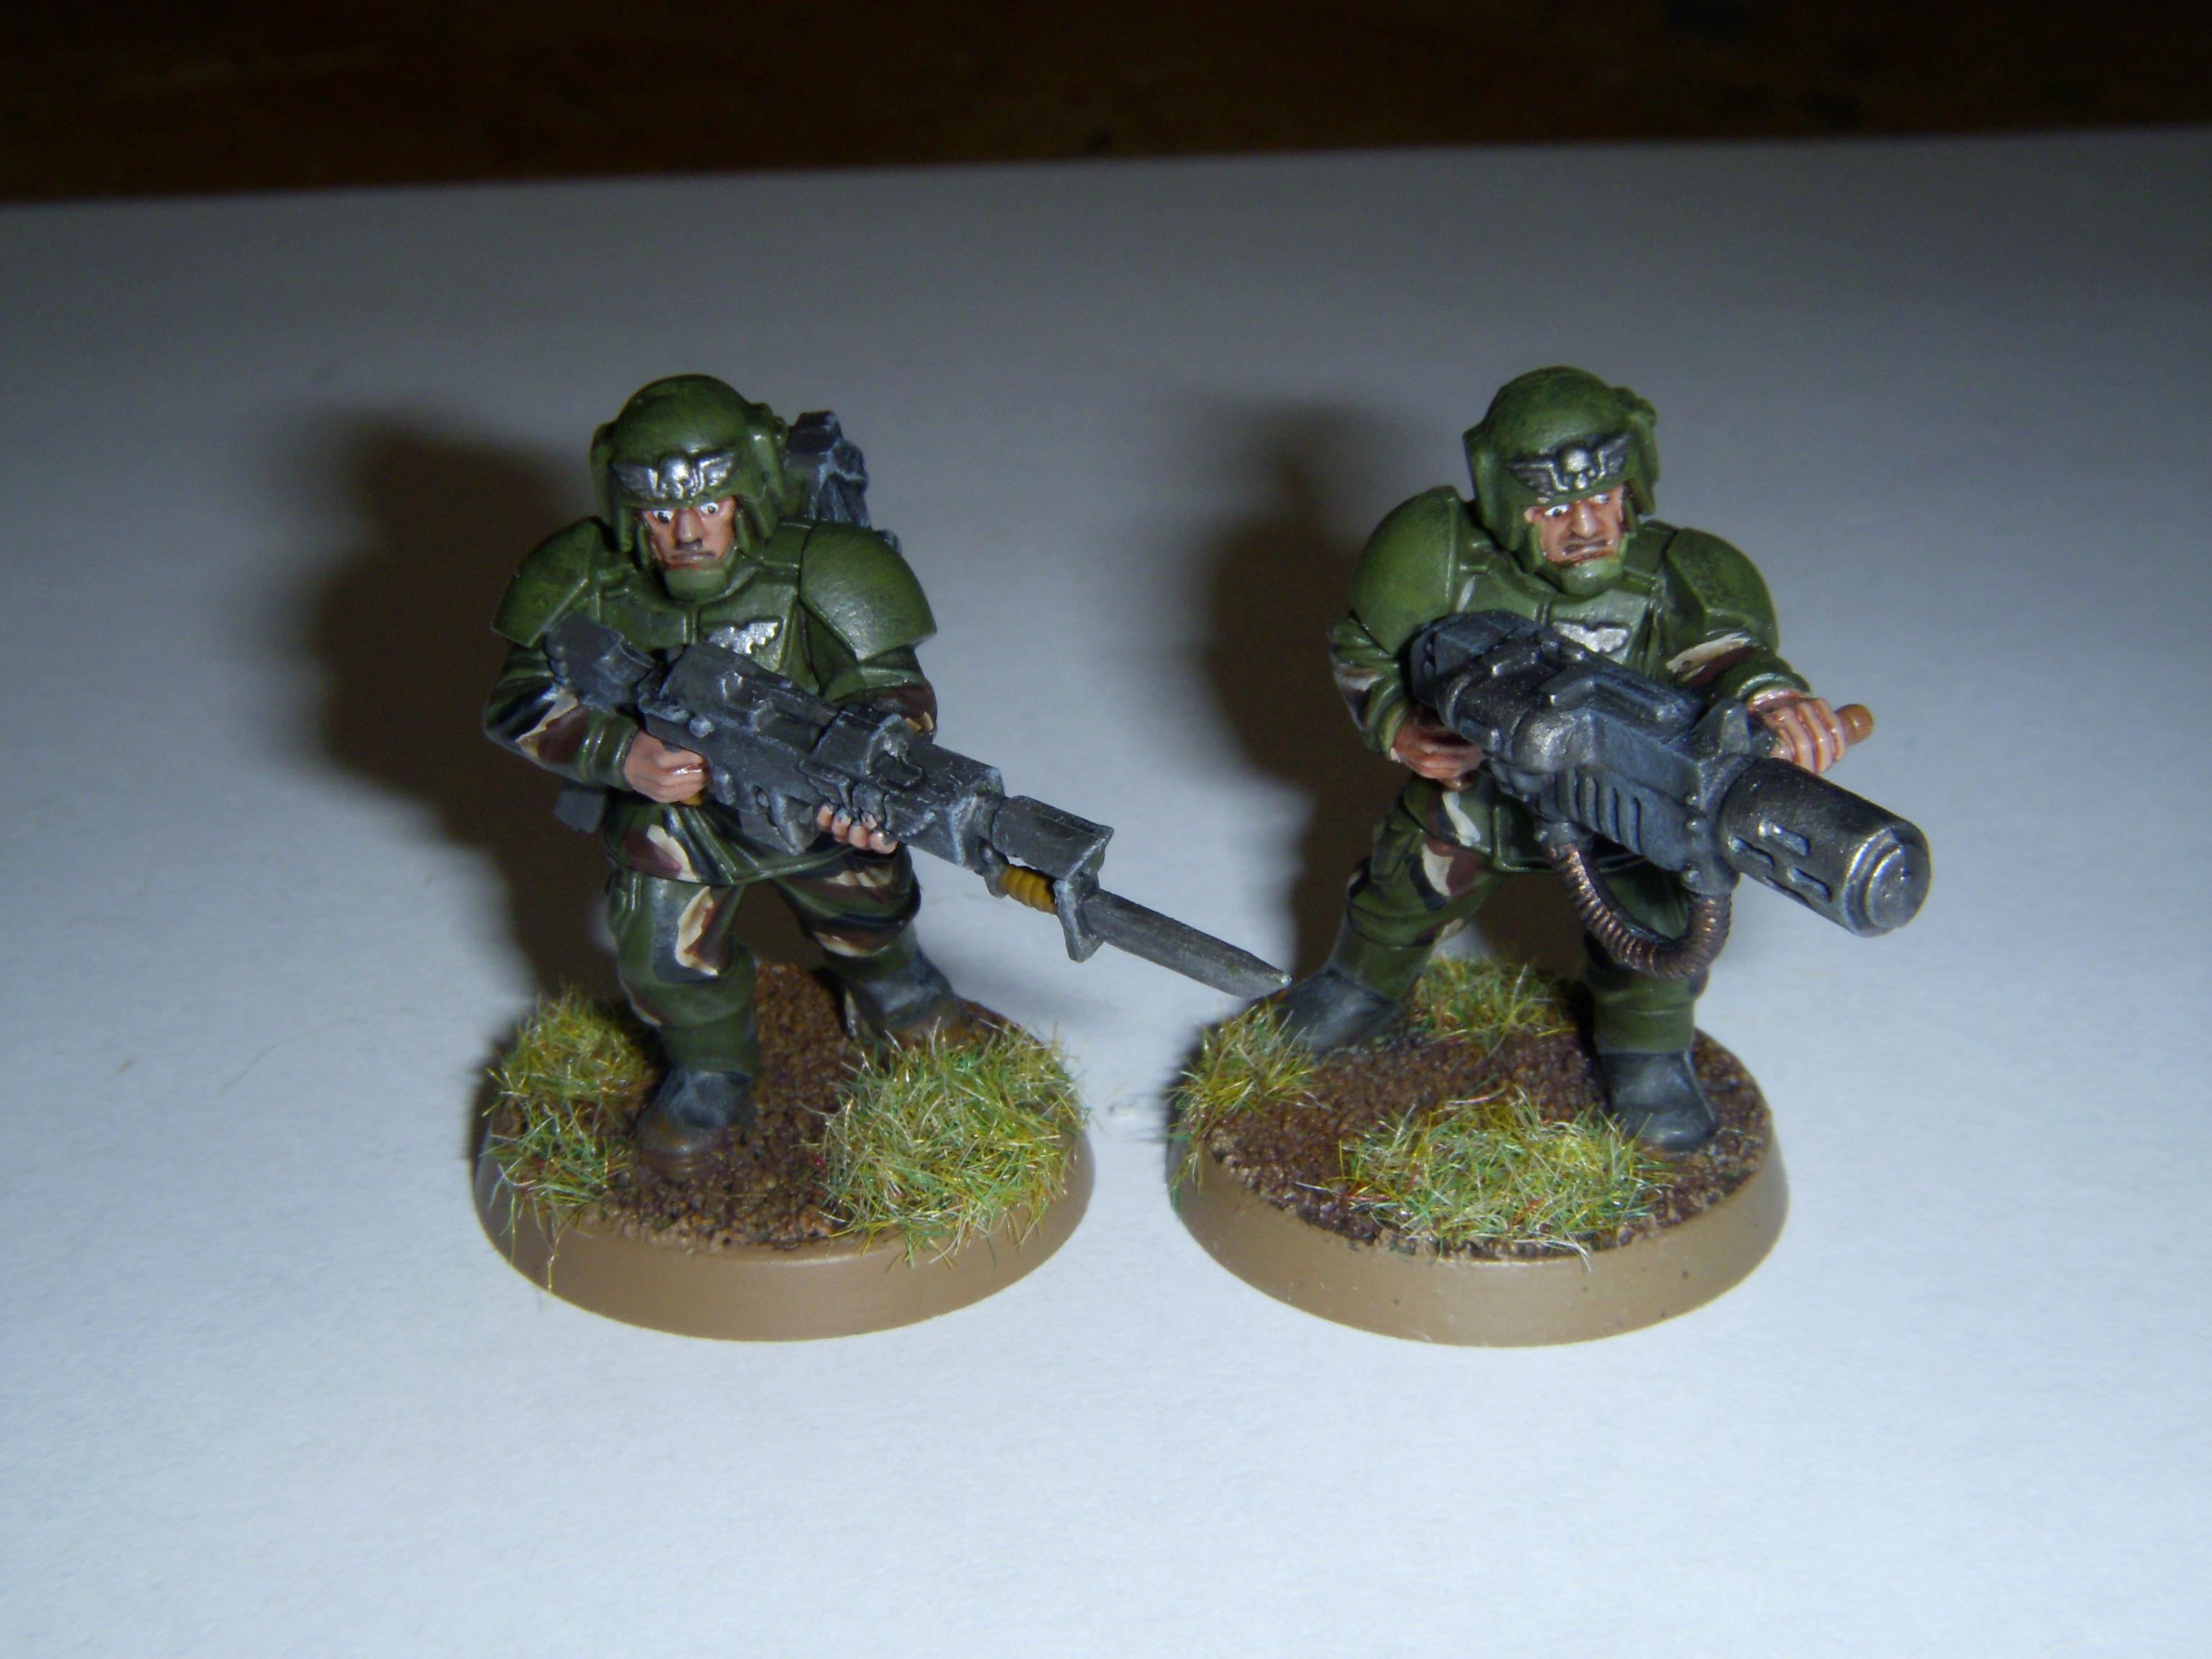 Cadians, Imperial Guard, Imperial Guard Cadian